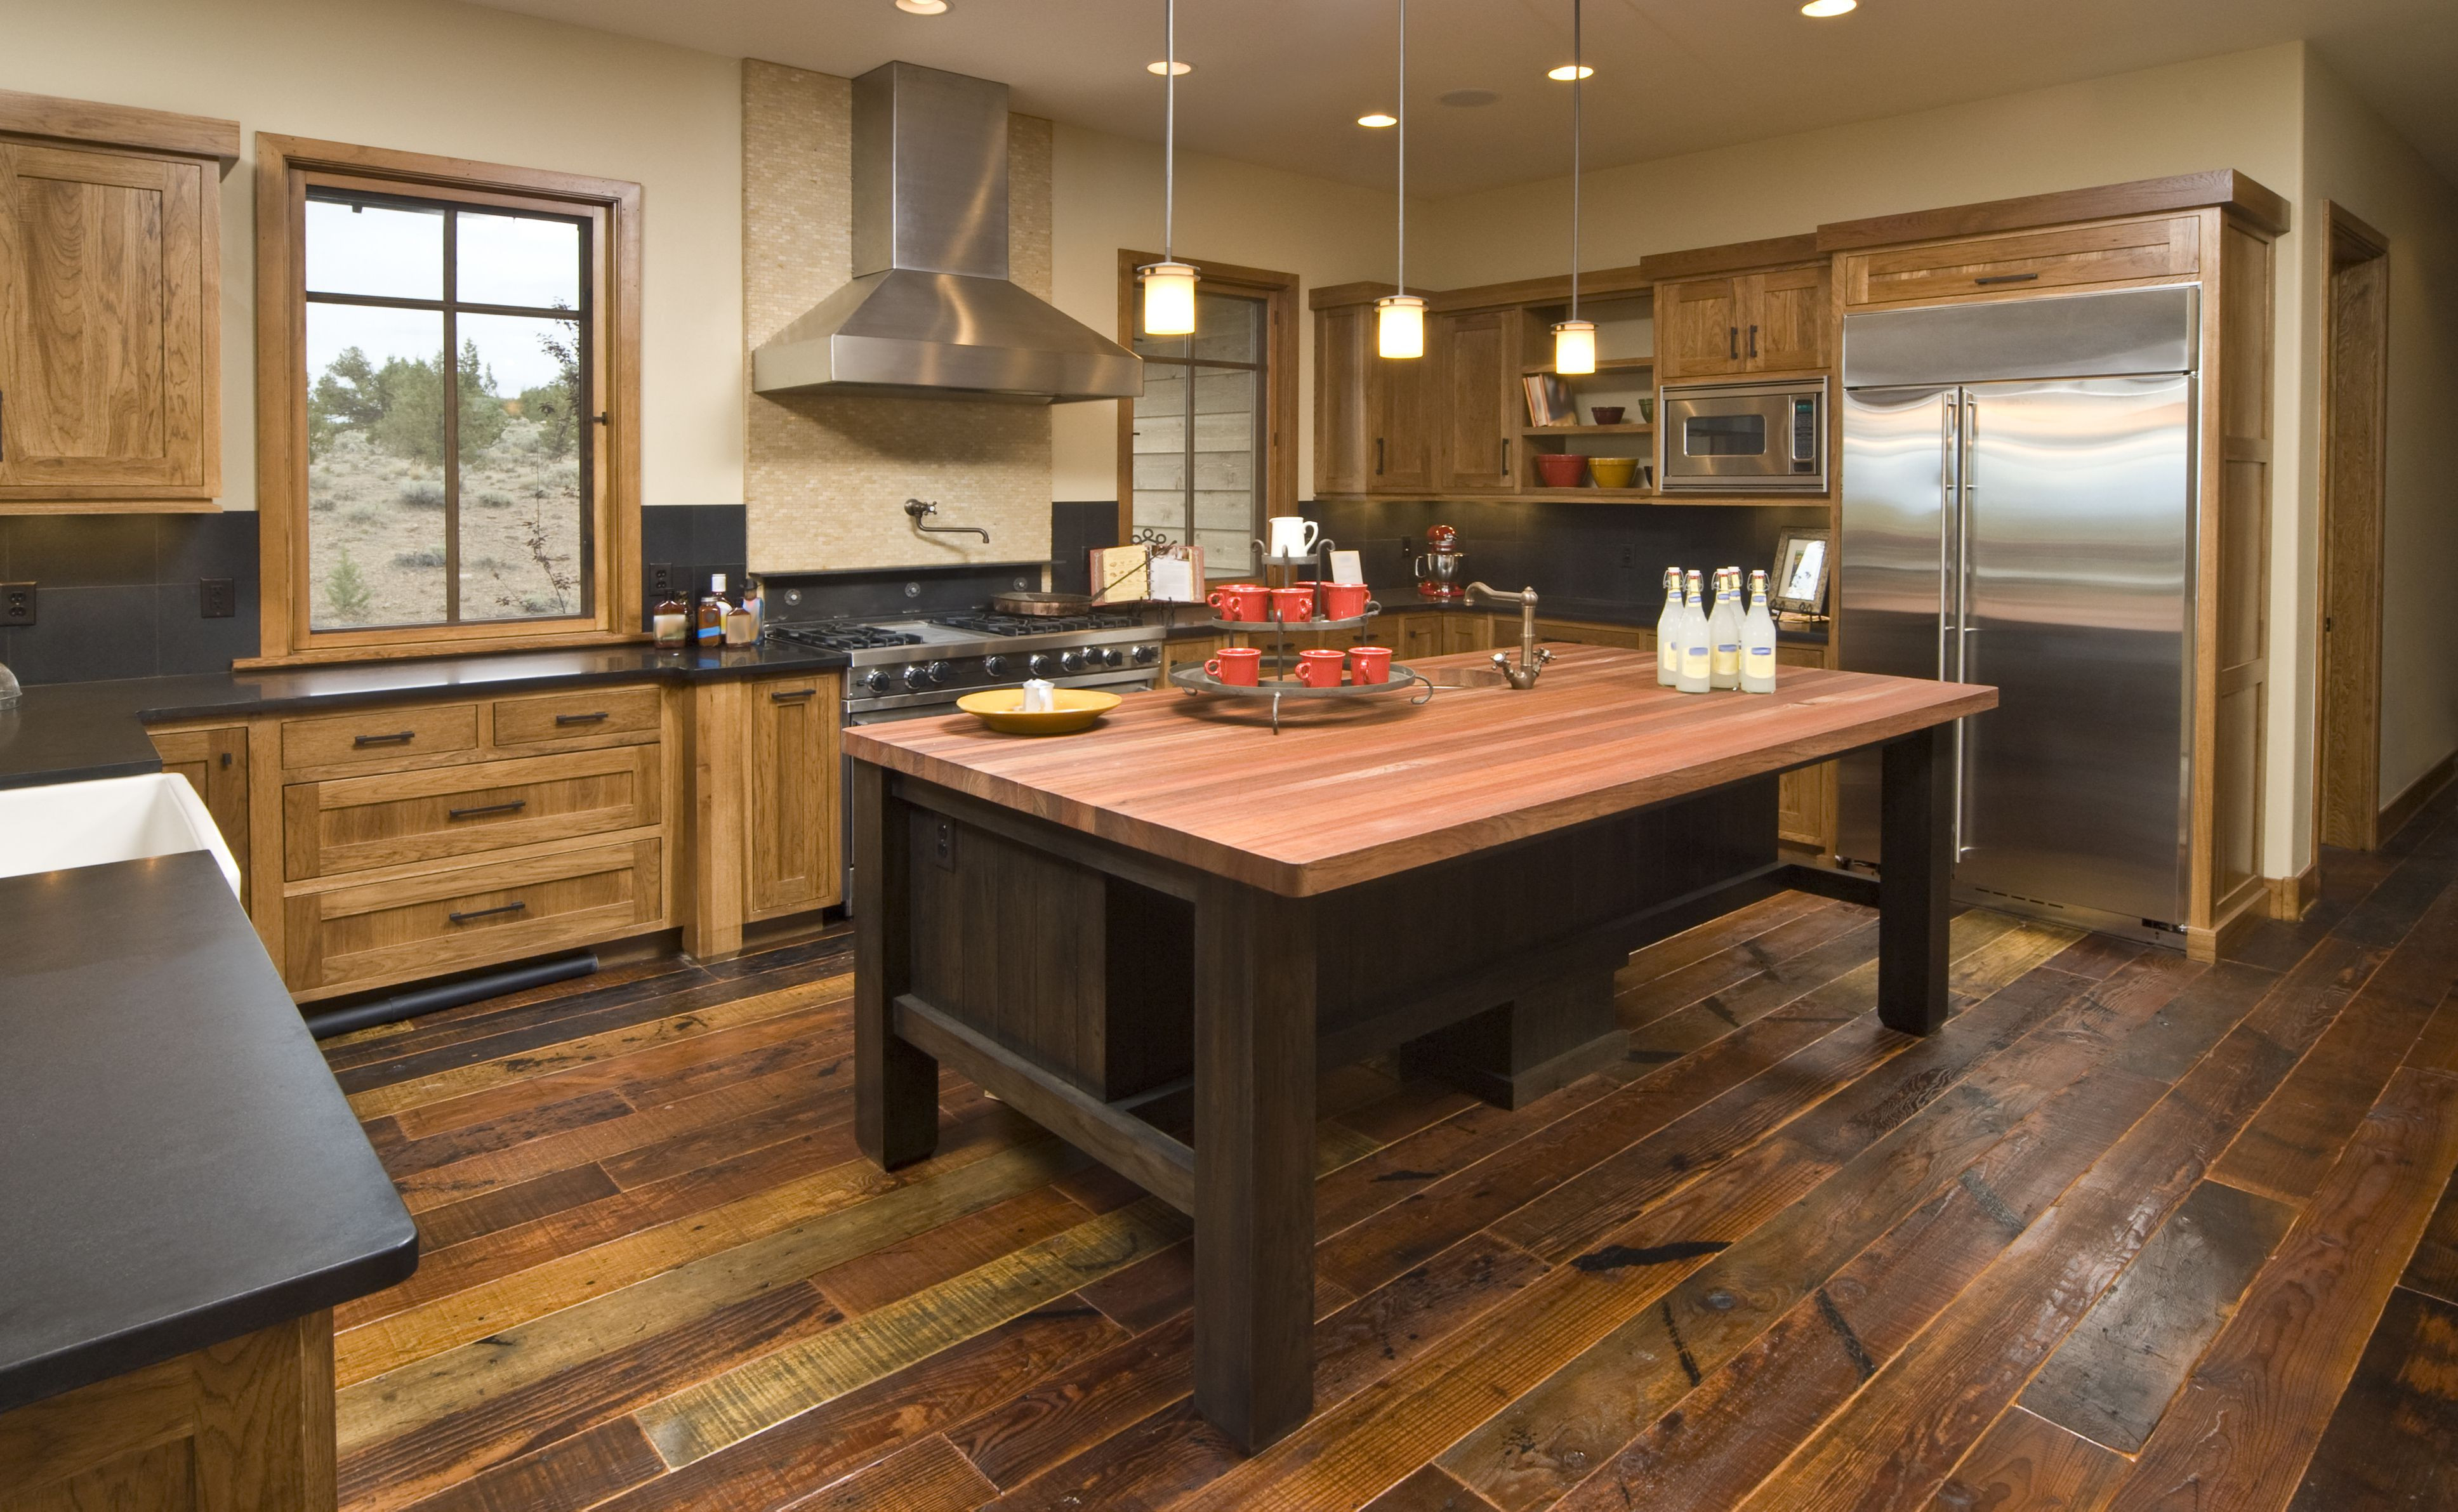 2 1 4 Wide Hardwood Flooring Of where to Buy Reclaimed Wood Flooring for Rustic Modern Kitchen 157565456 58ae76a73df78c345ba2f5d1